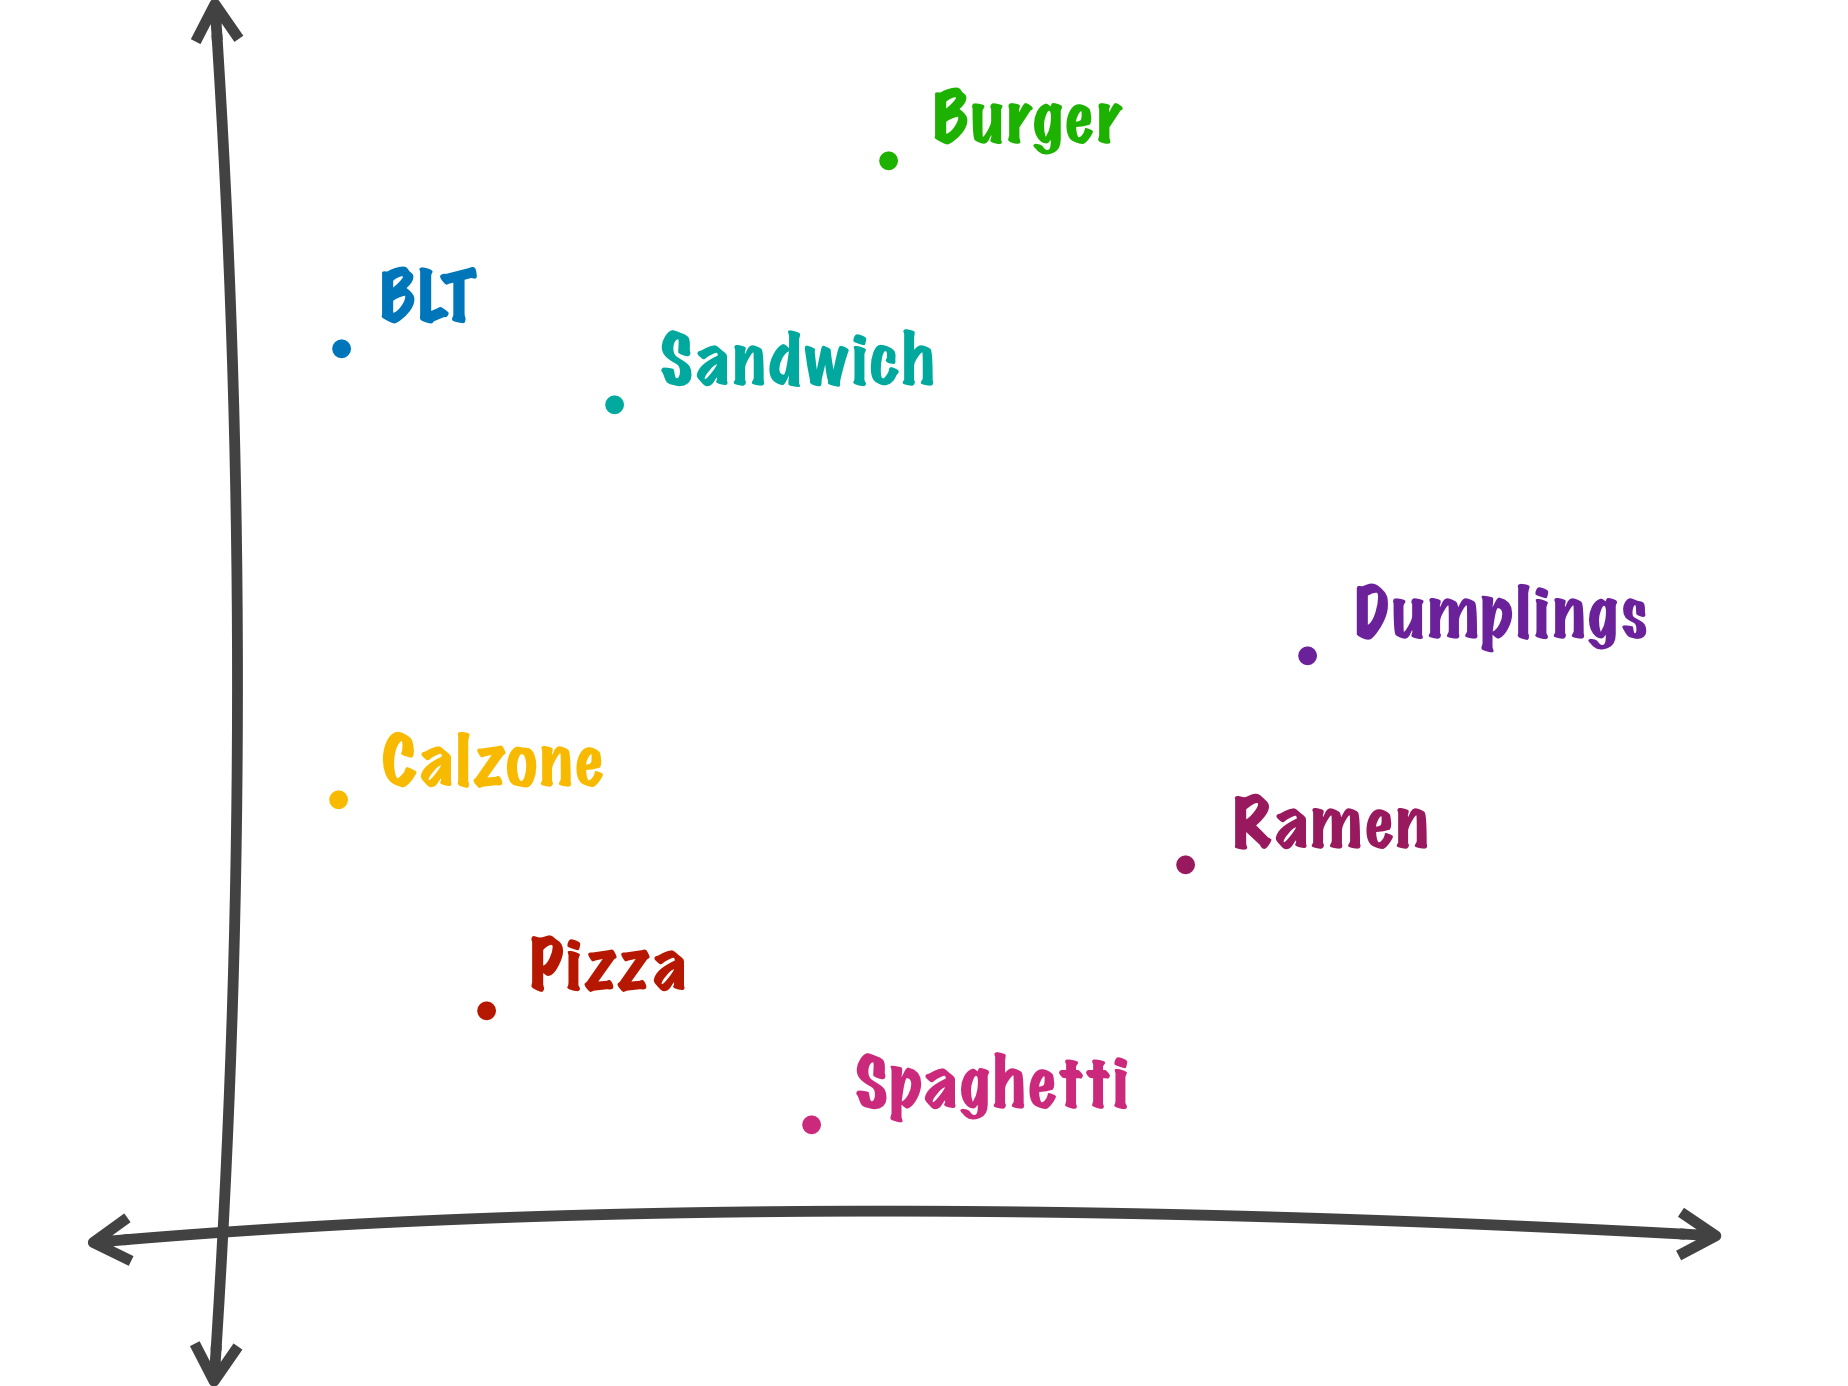 Example Word2Vec vector space trained with menu data where similar foods are closer to each other.